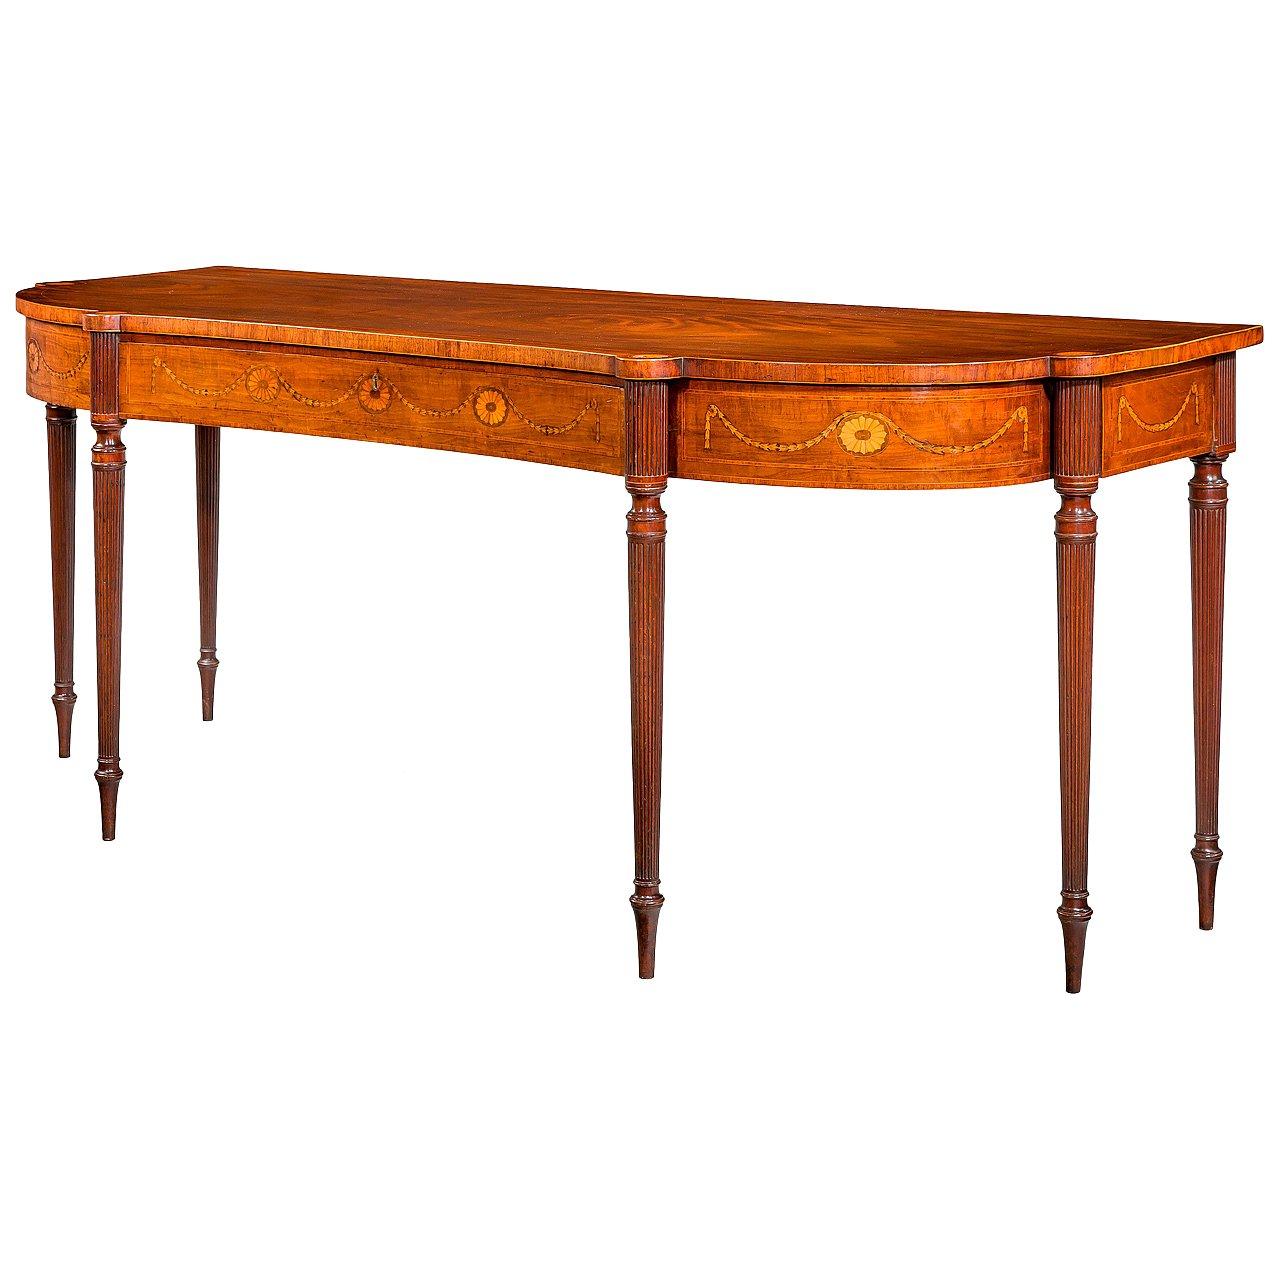 George III Period Serving Table